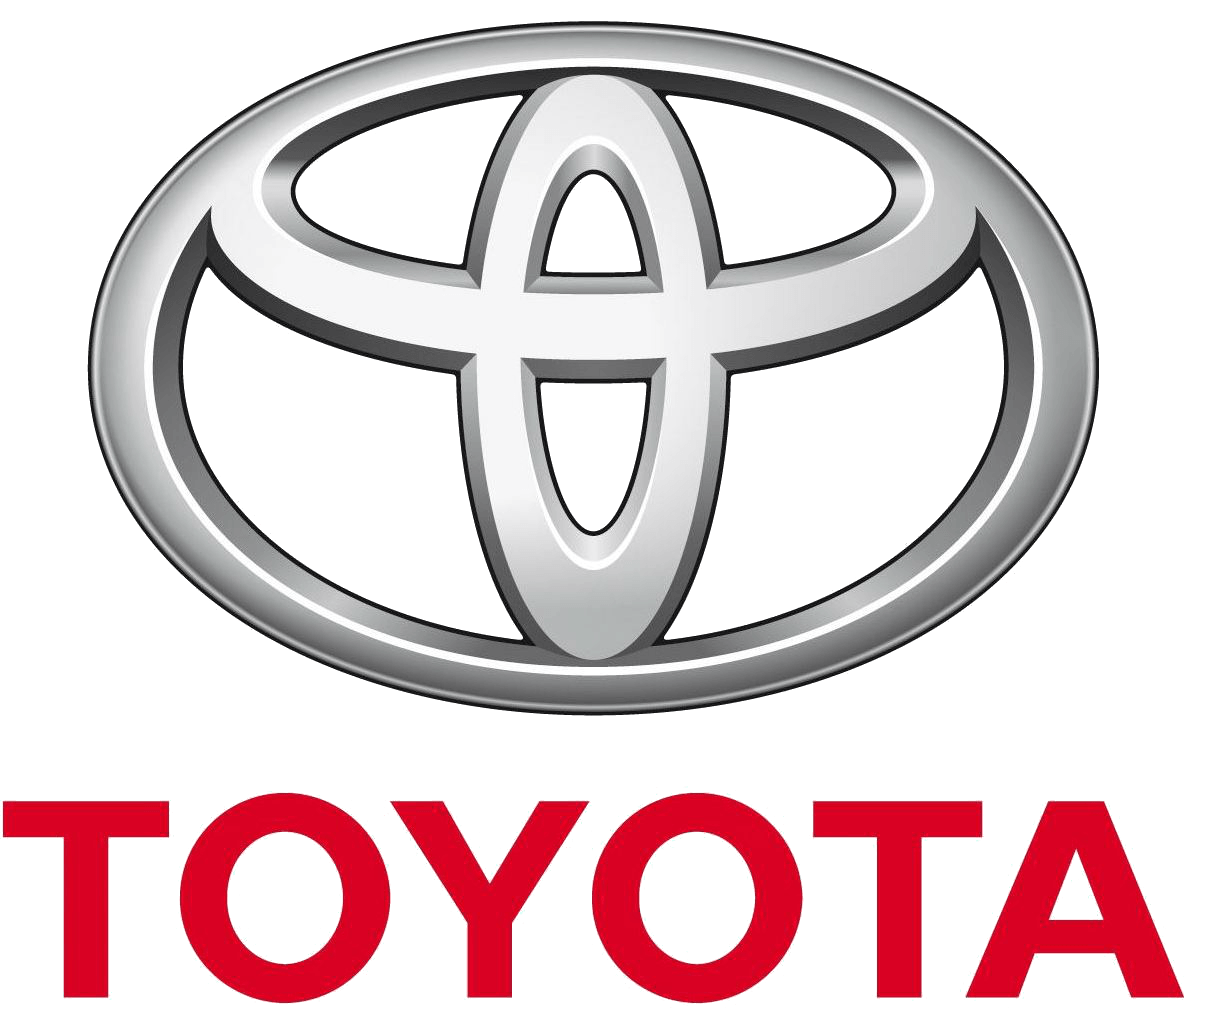 Red and White Oval Car Logo - Toyota Logo, Toyota Car Symbol Meaning and History | Car Brand Names.com